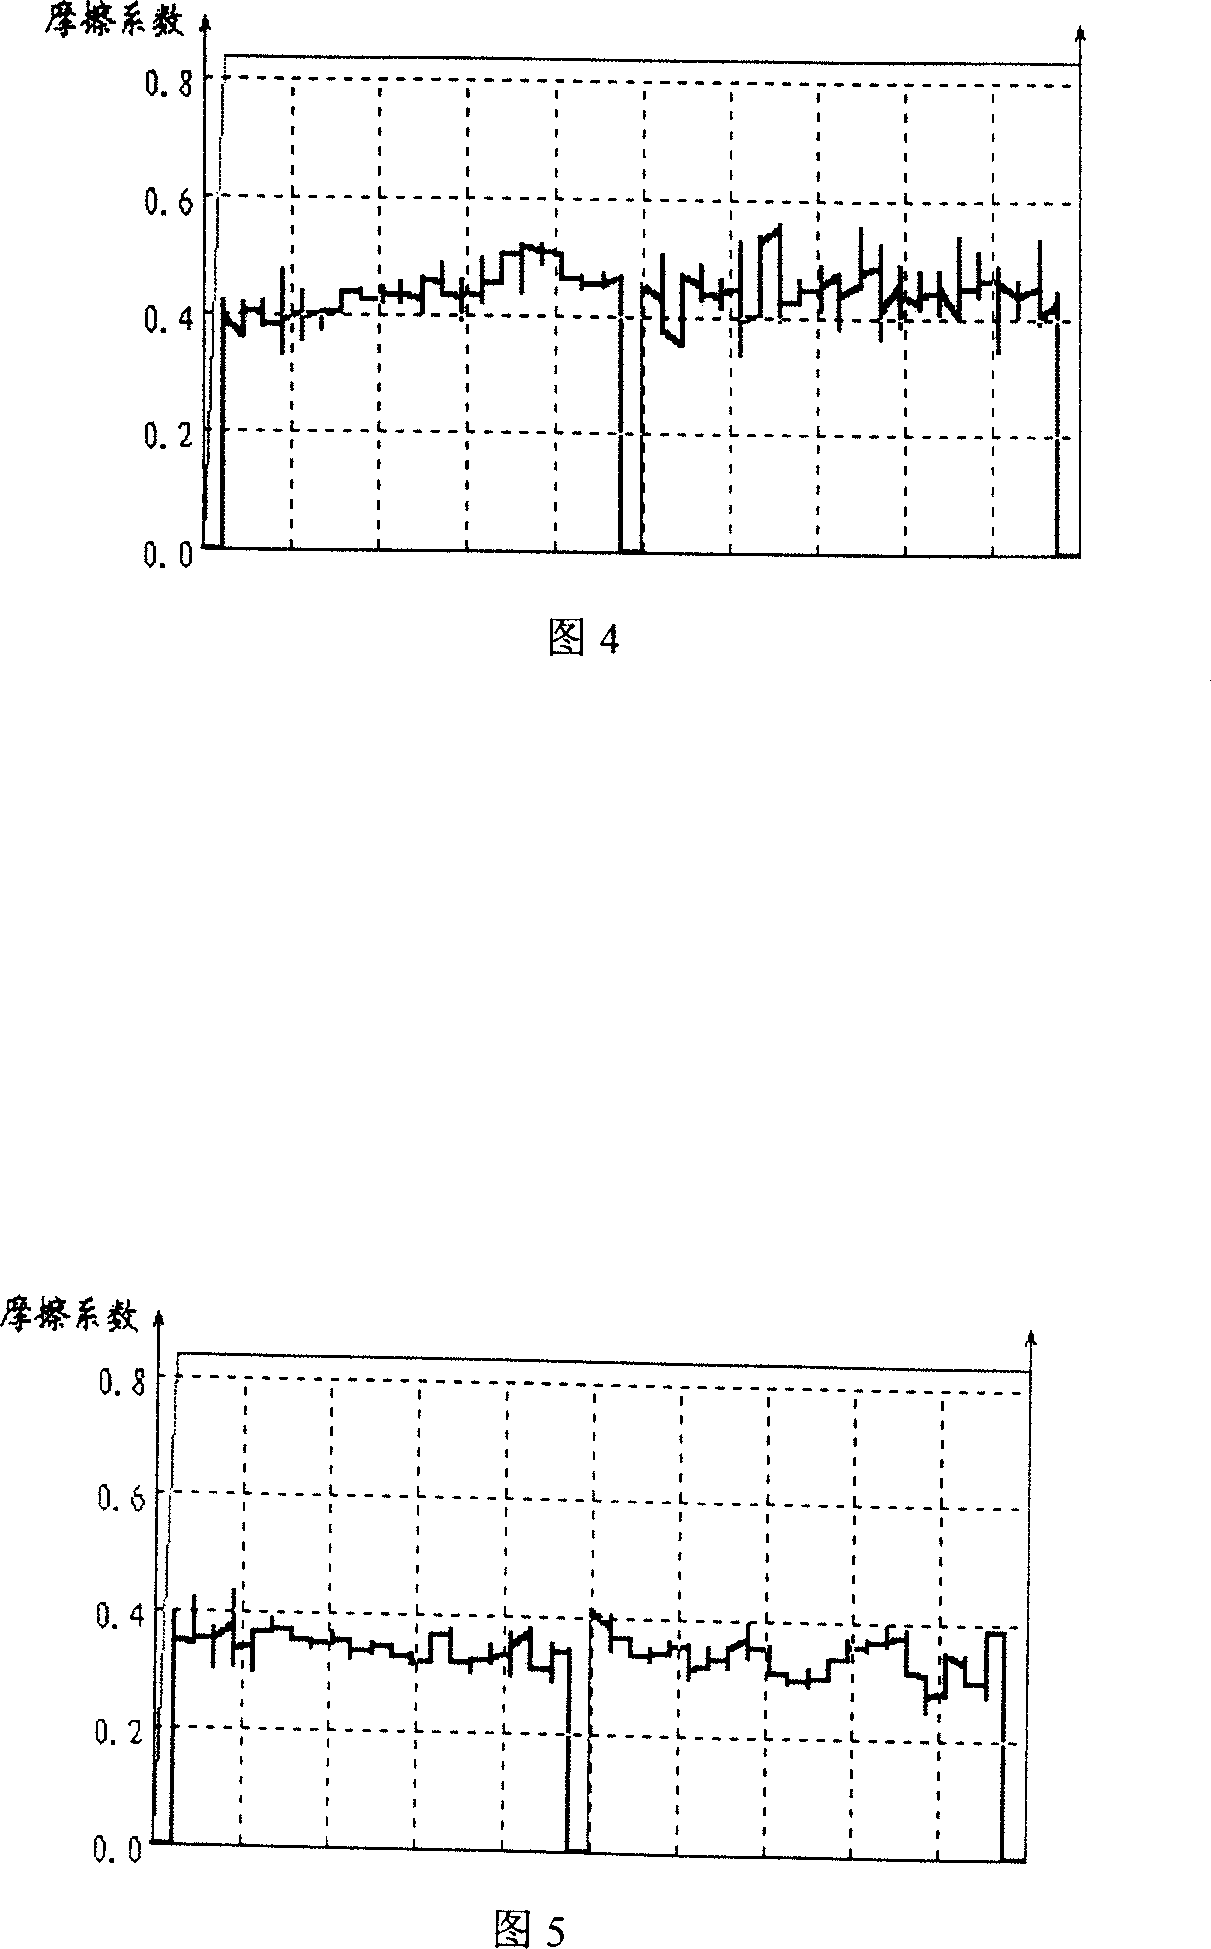 Production process of metal based sintered friction plate